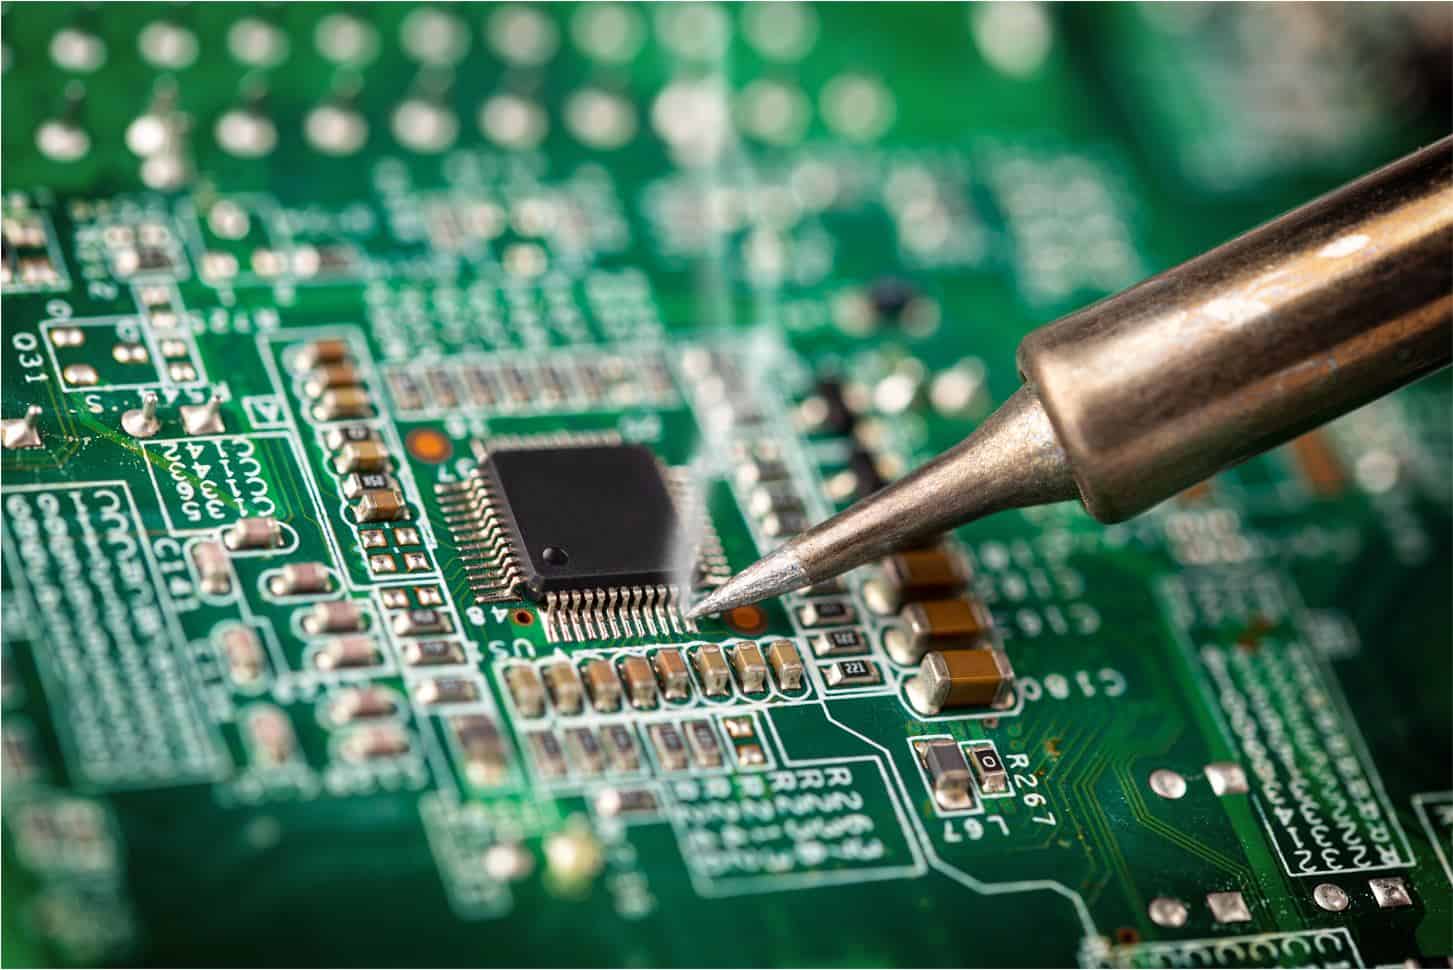 <p><strong>SOLDERING TOOLS FOR</strong> ____ ____<strong>:</strong></p><p>Solder guarantees ____ between two wires to establish ____ ____. In addition, solder “ ____ “ the wiring down to the circuit board. Because solder joints are typically small, it’s common to use a ____ ____ hooked up to a ____ ____ that allows the user to control the ____.</p>